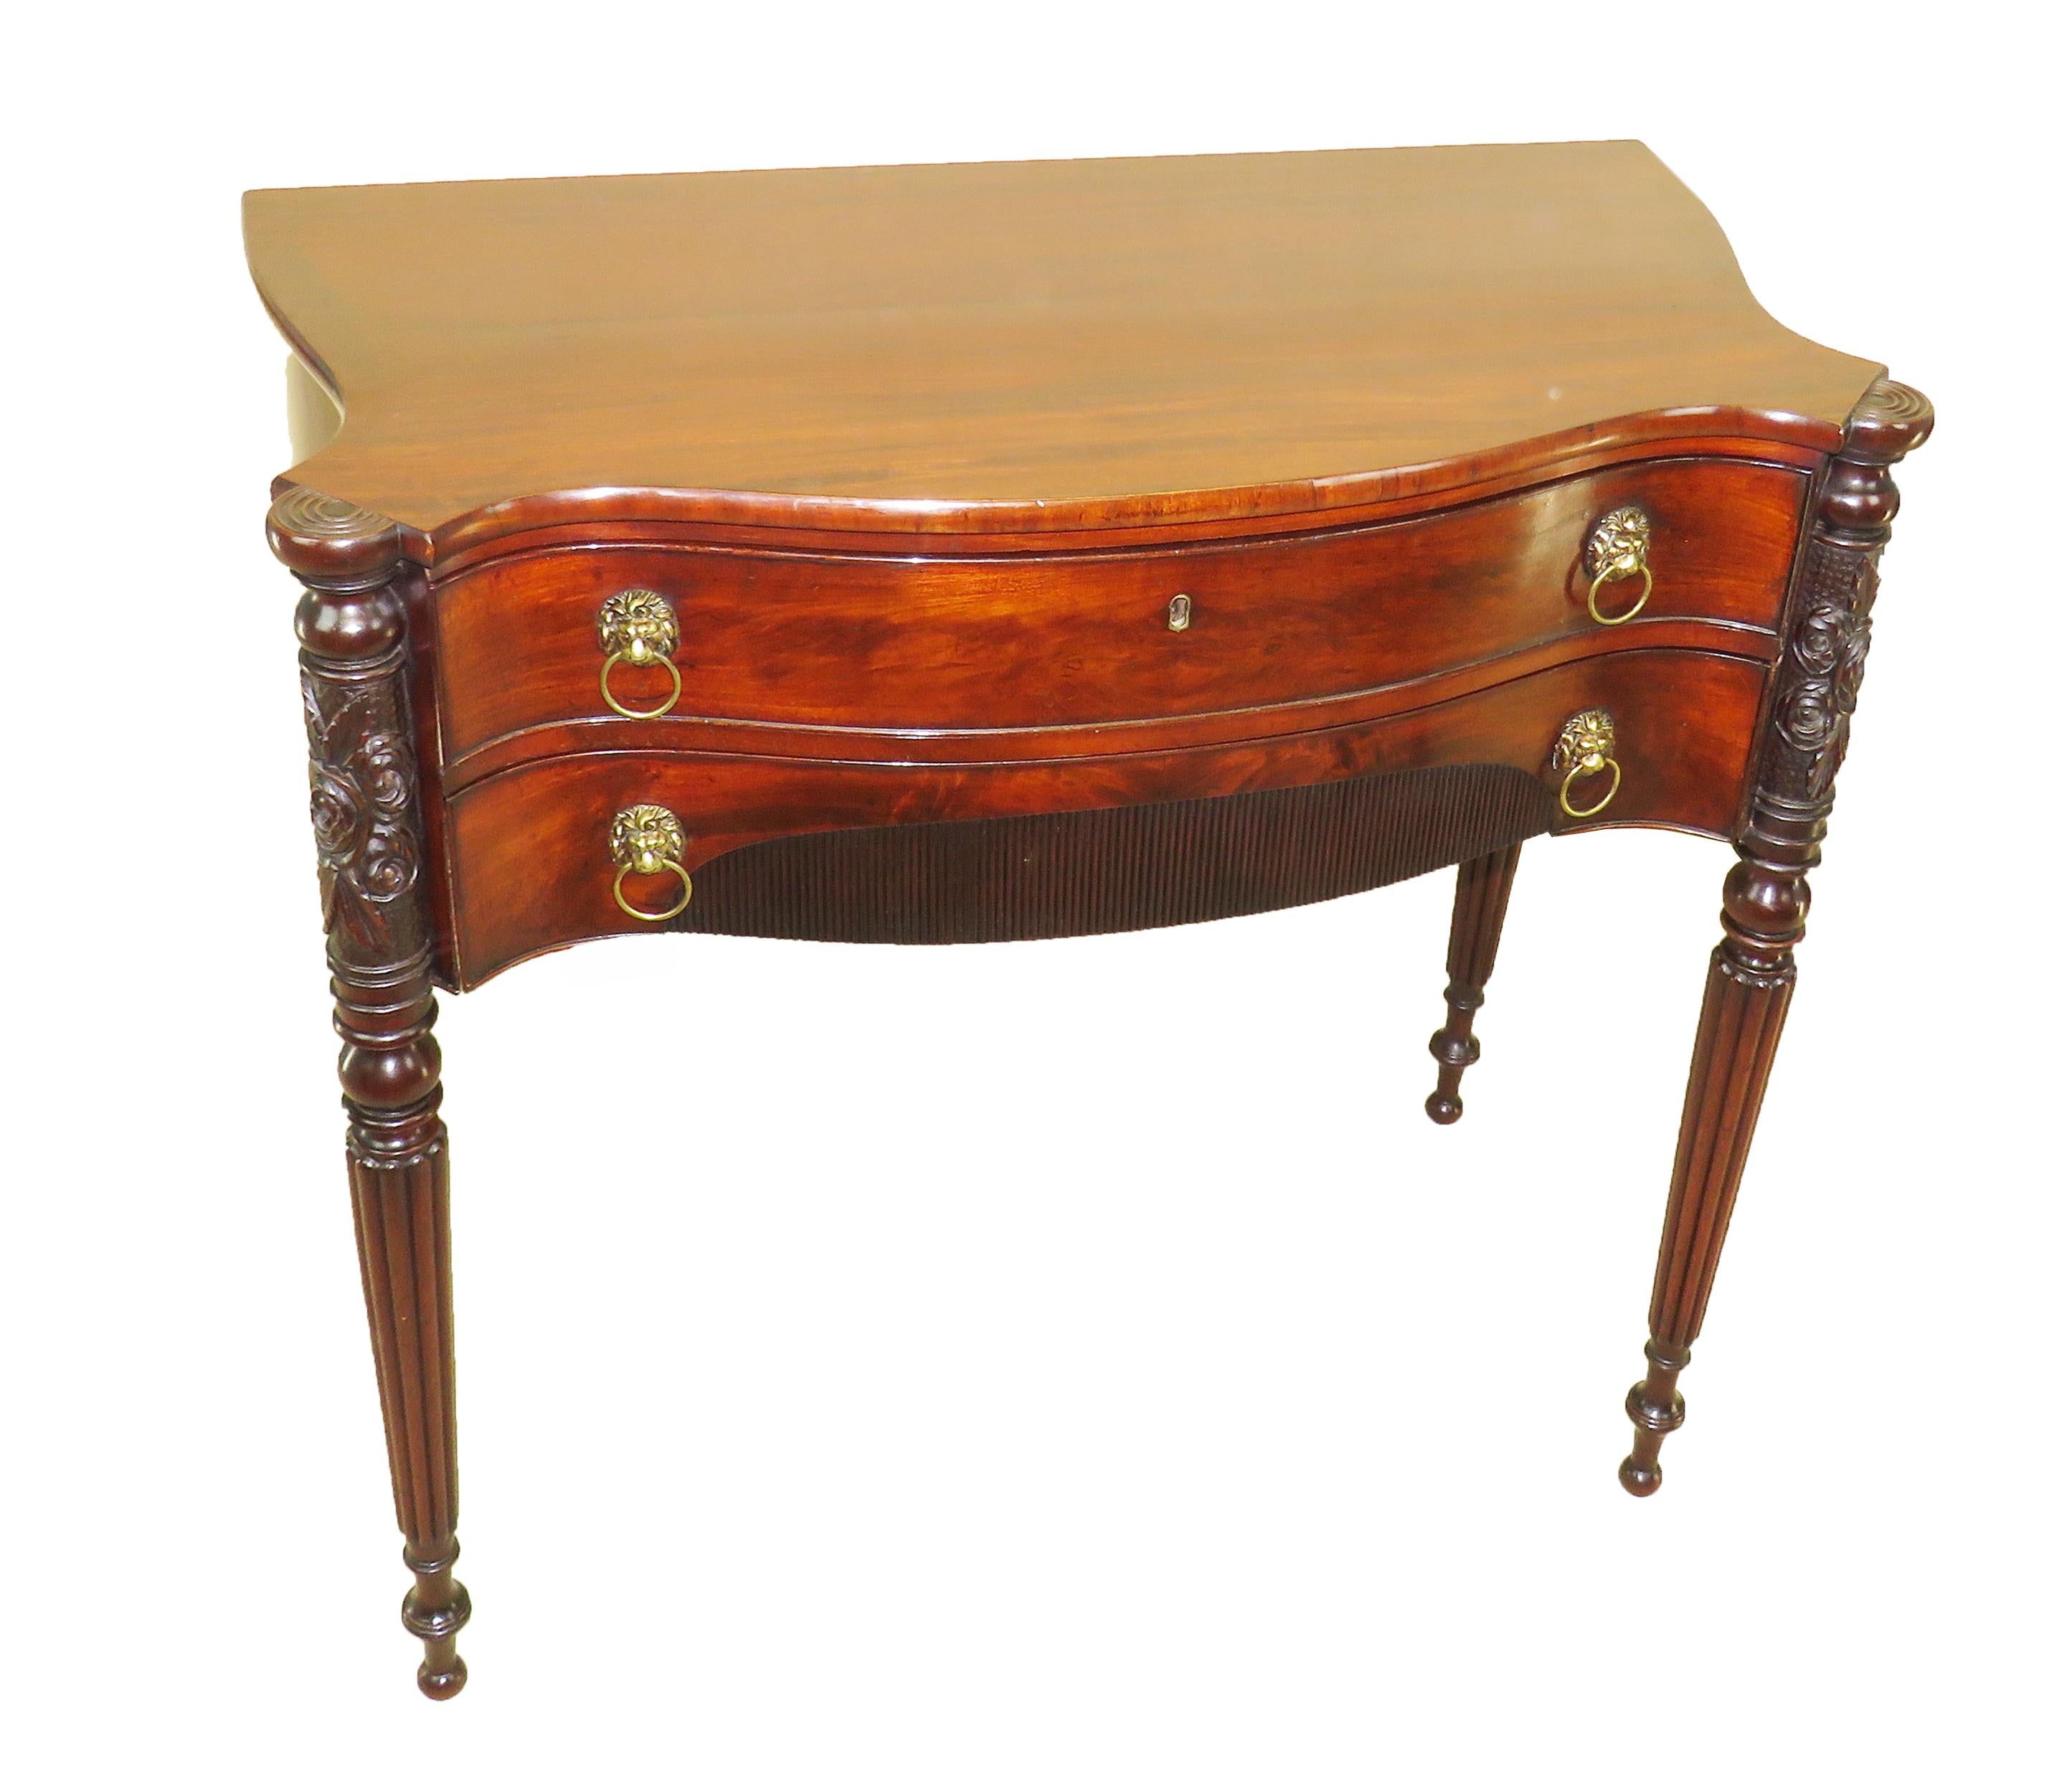 American 19th Century Federal Mahogany Serpentine Table In Good Condition For Sale In Bedfordshire, GB